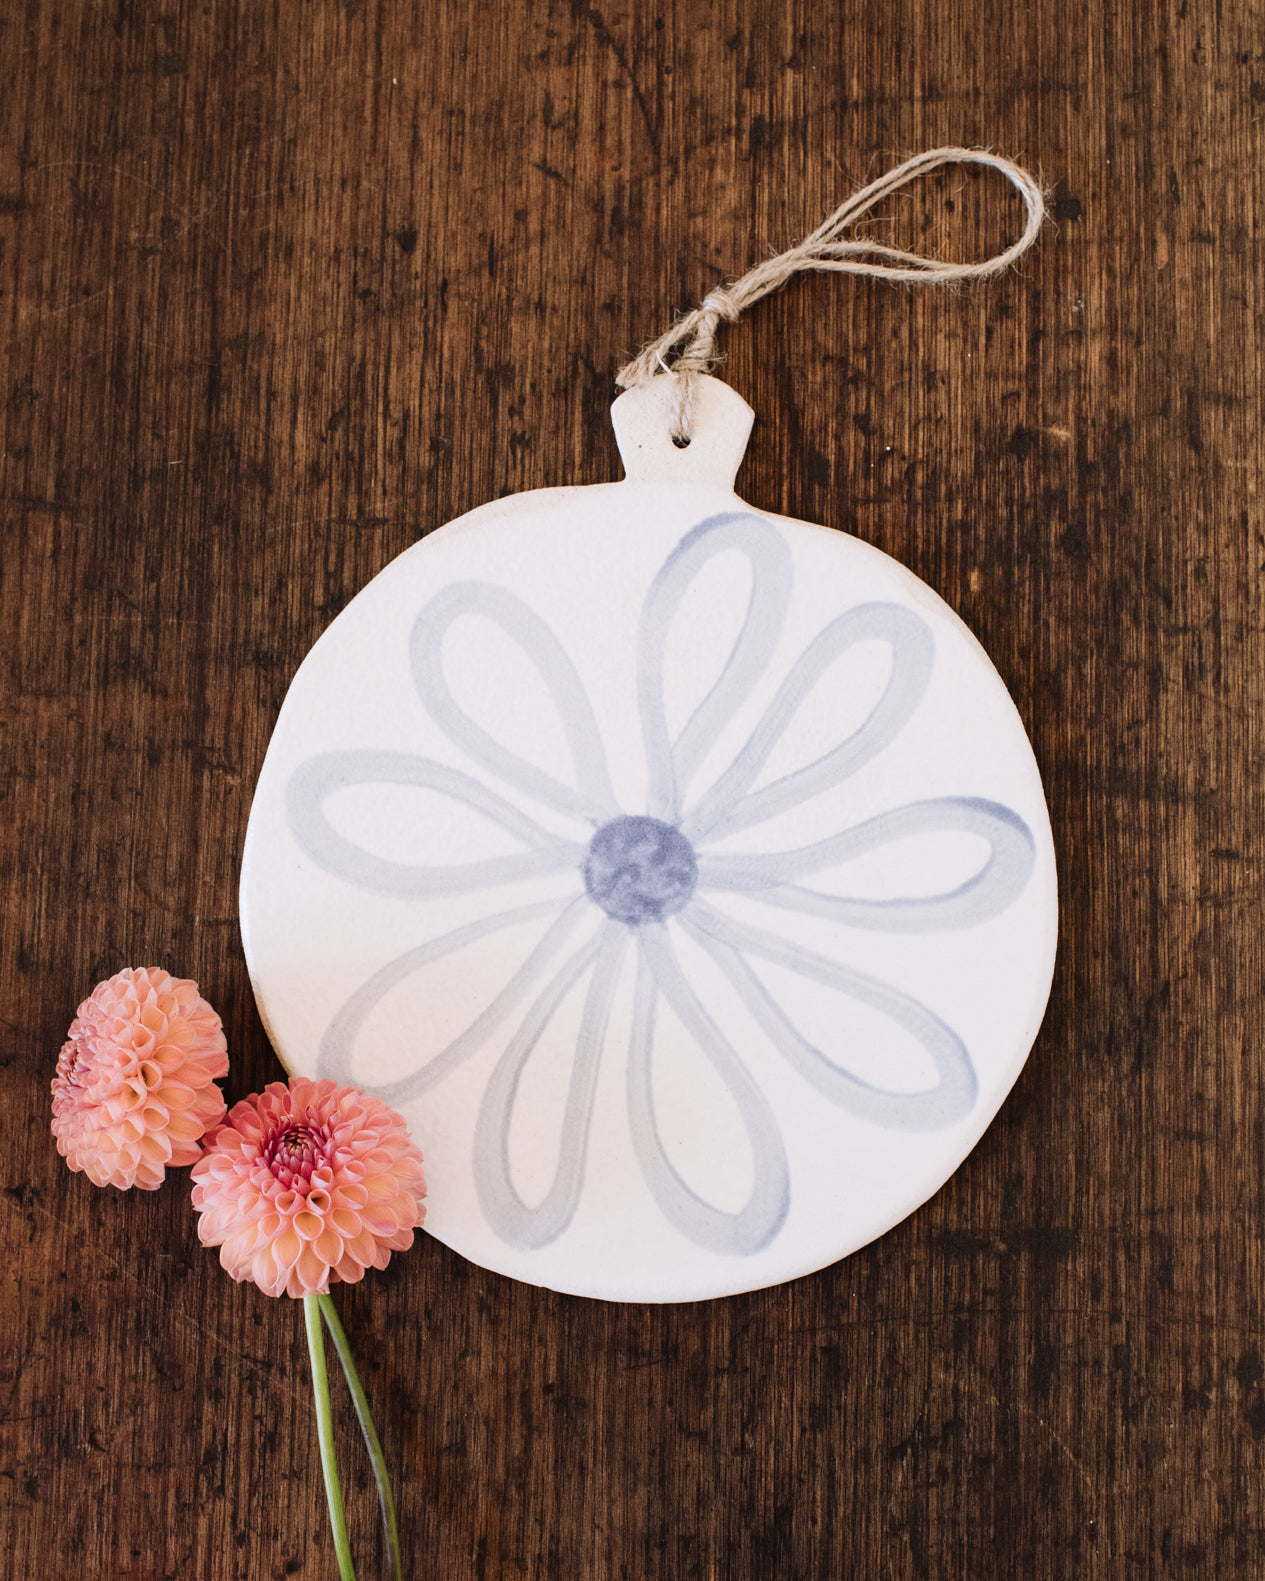 Daisy flower round cheeseboard with hemp cord by clay beehive ceramics